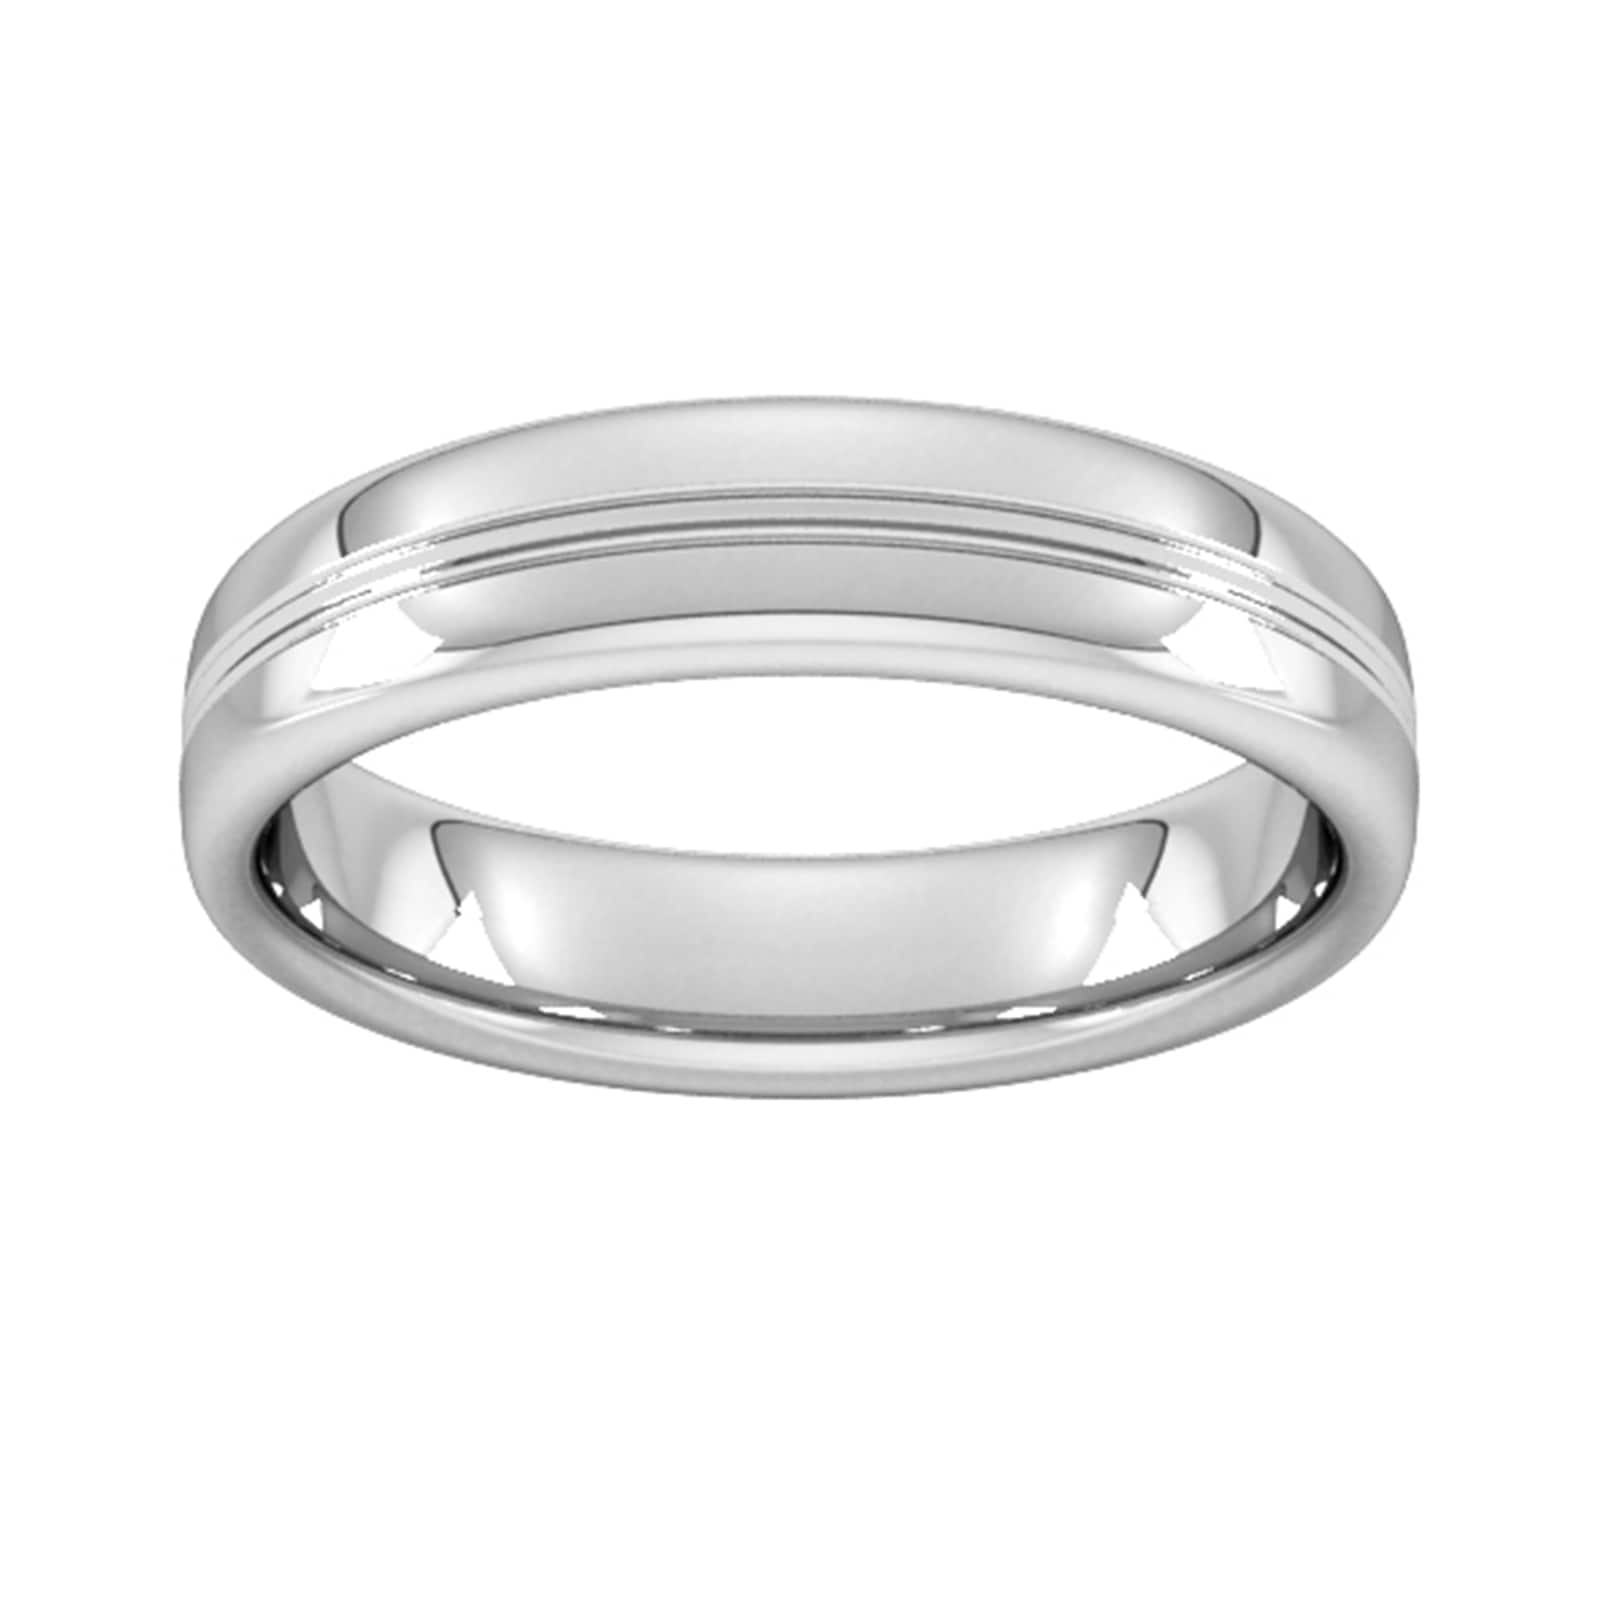 5mm Slight Court Extra Heavy Grooved Polished Finish Wedding Ring In 18 Carat White Gold - Ring Size T